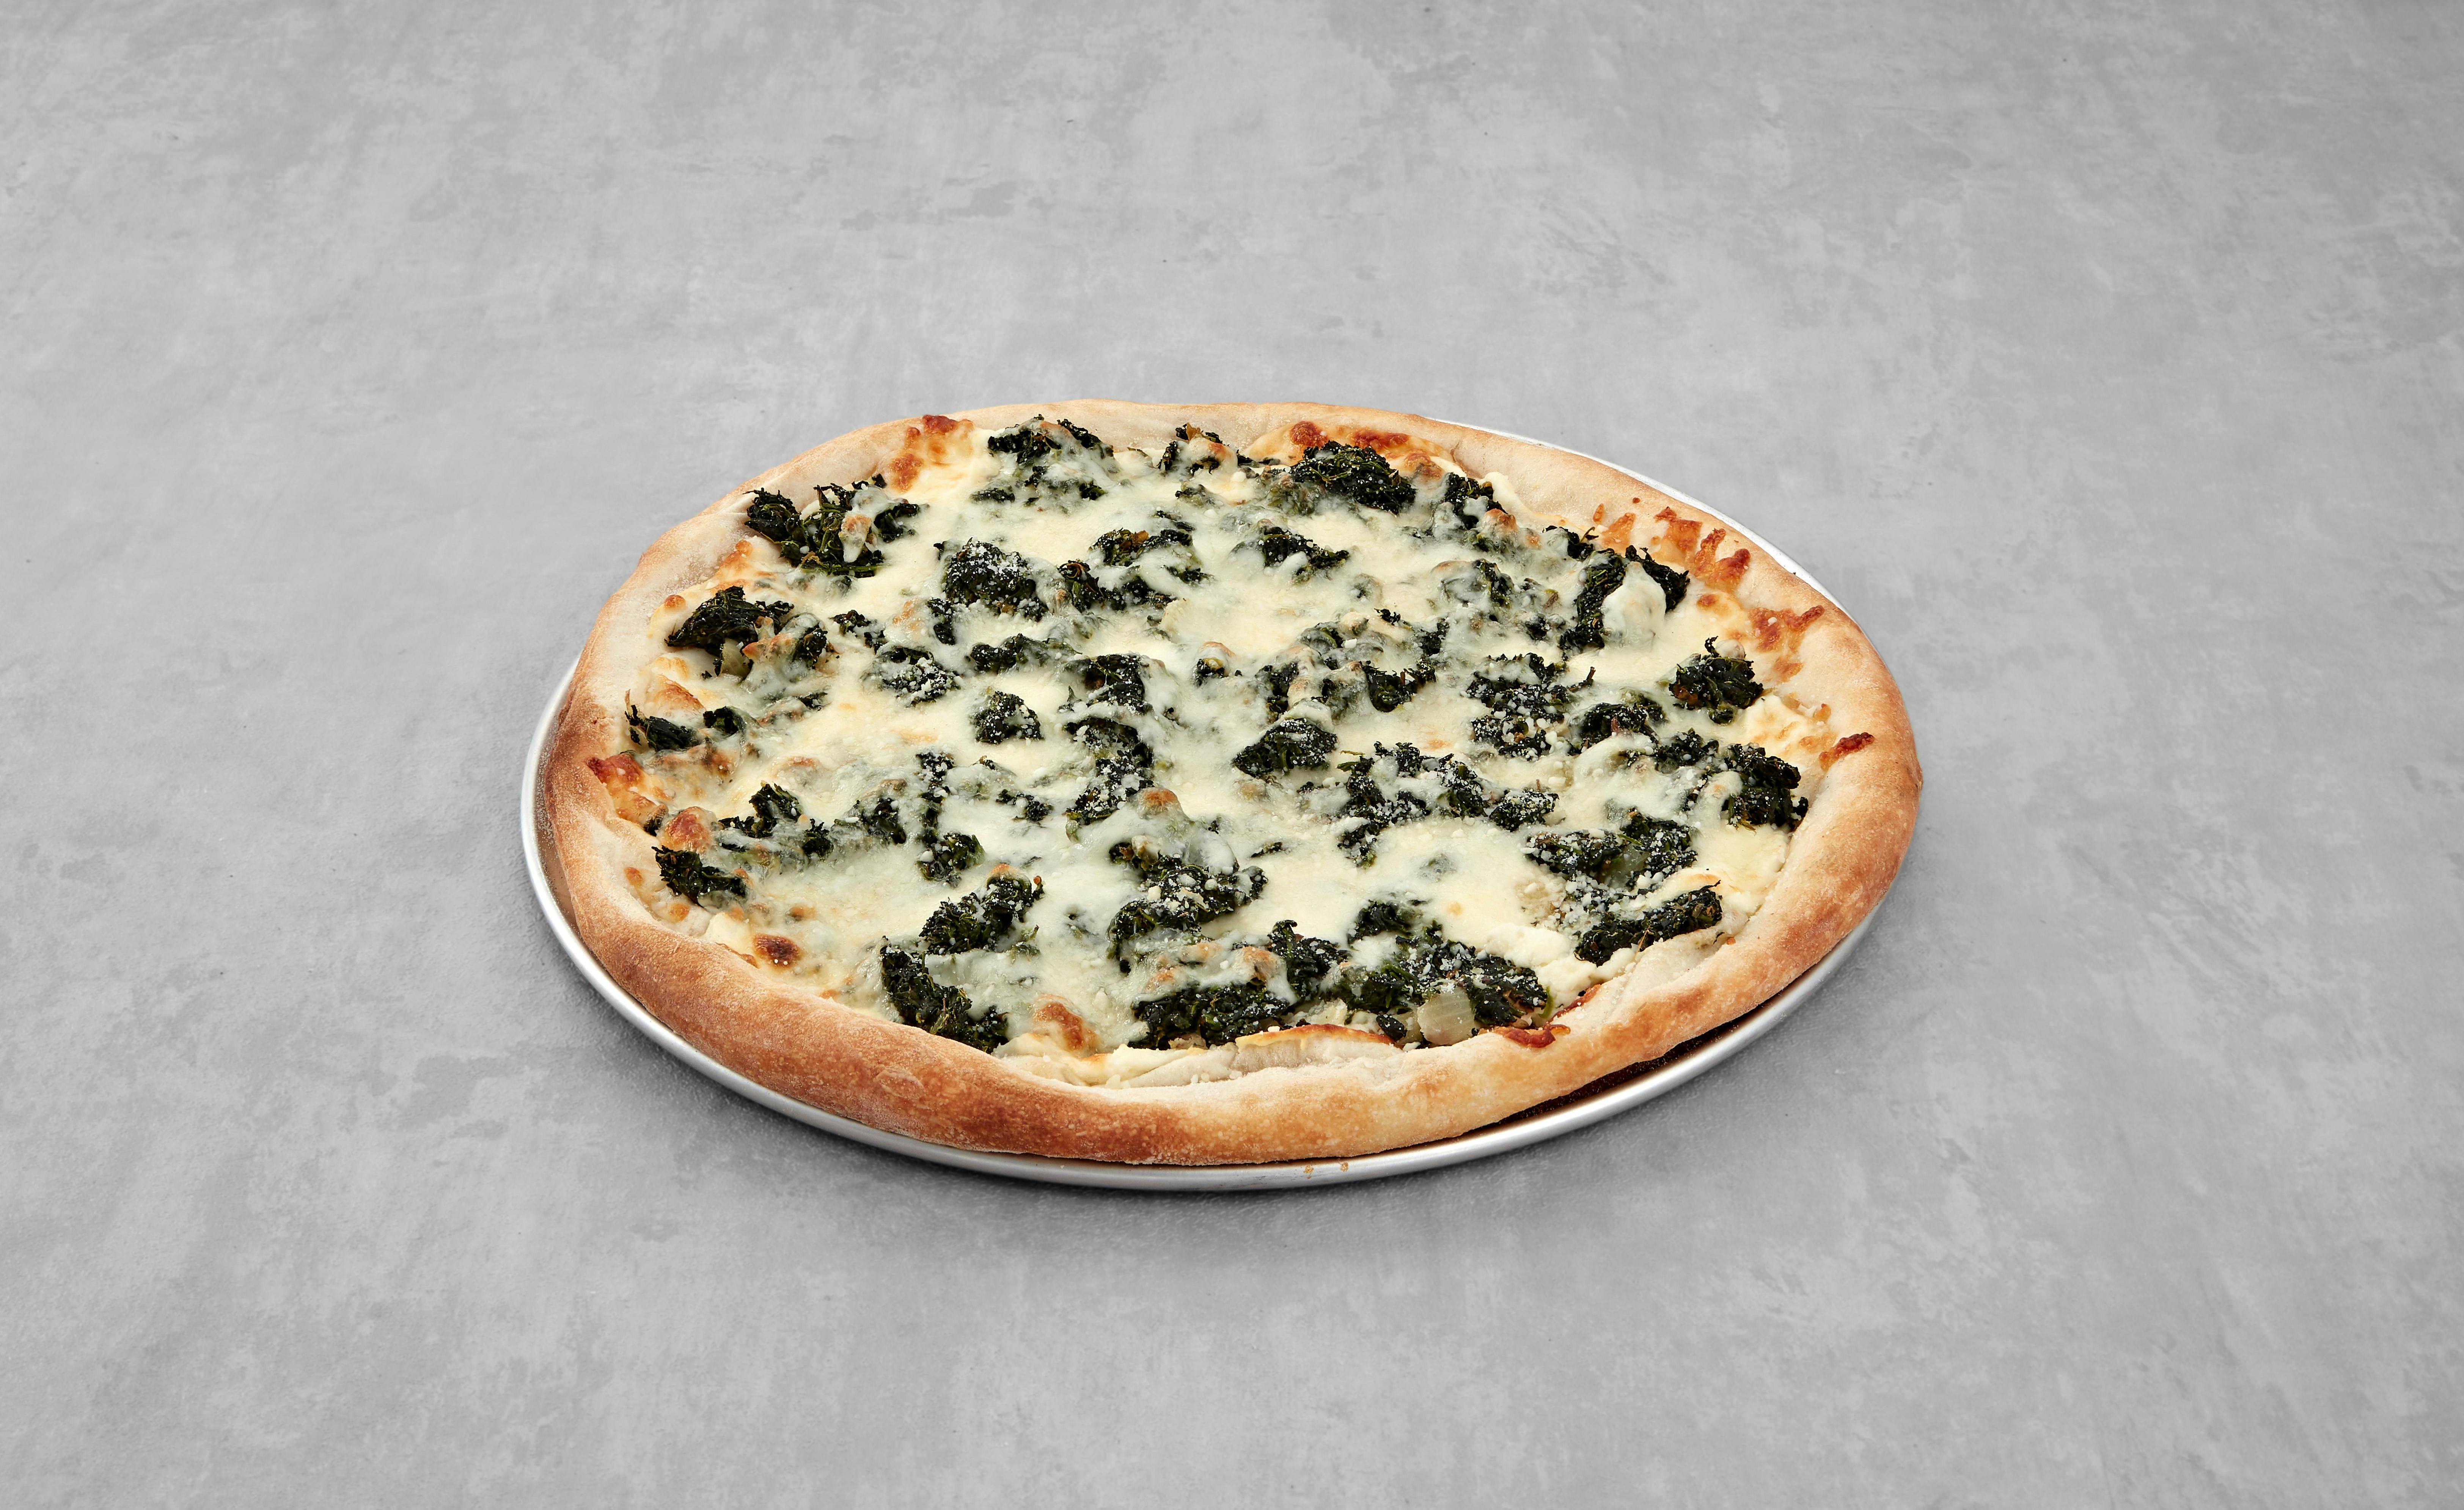 White Spinach Pizza Personal from Mario's Pizzeria in Seaford, NY